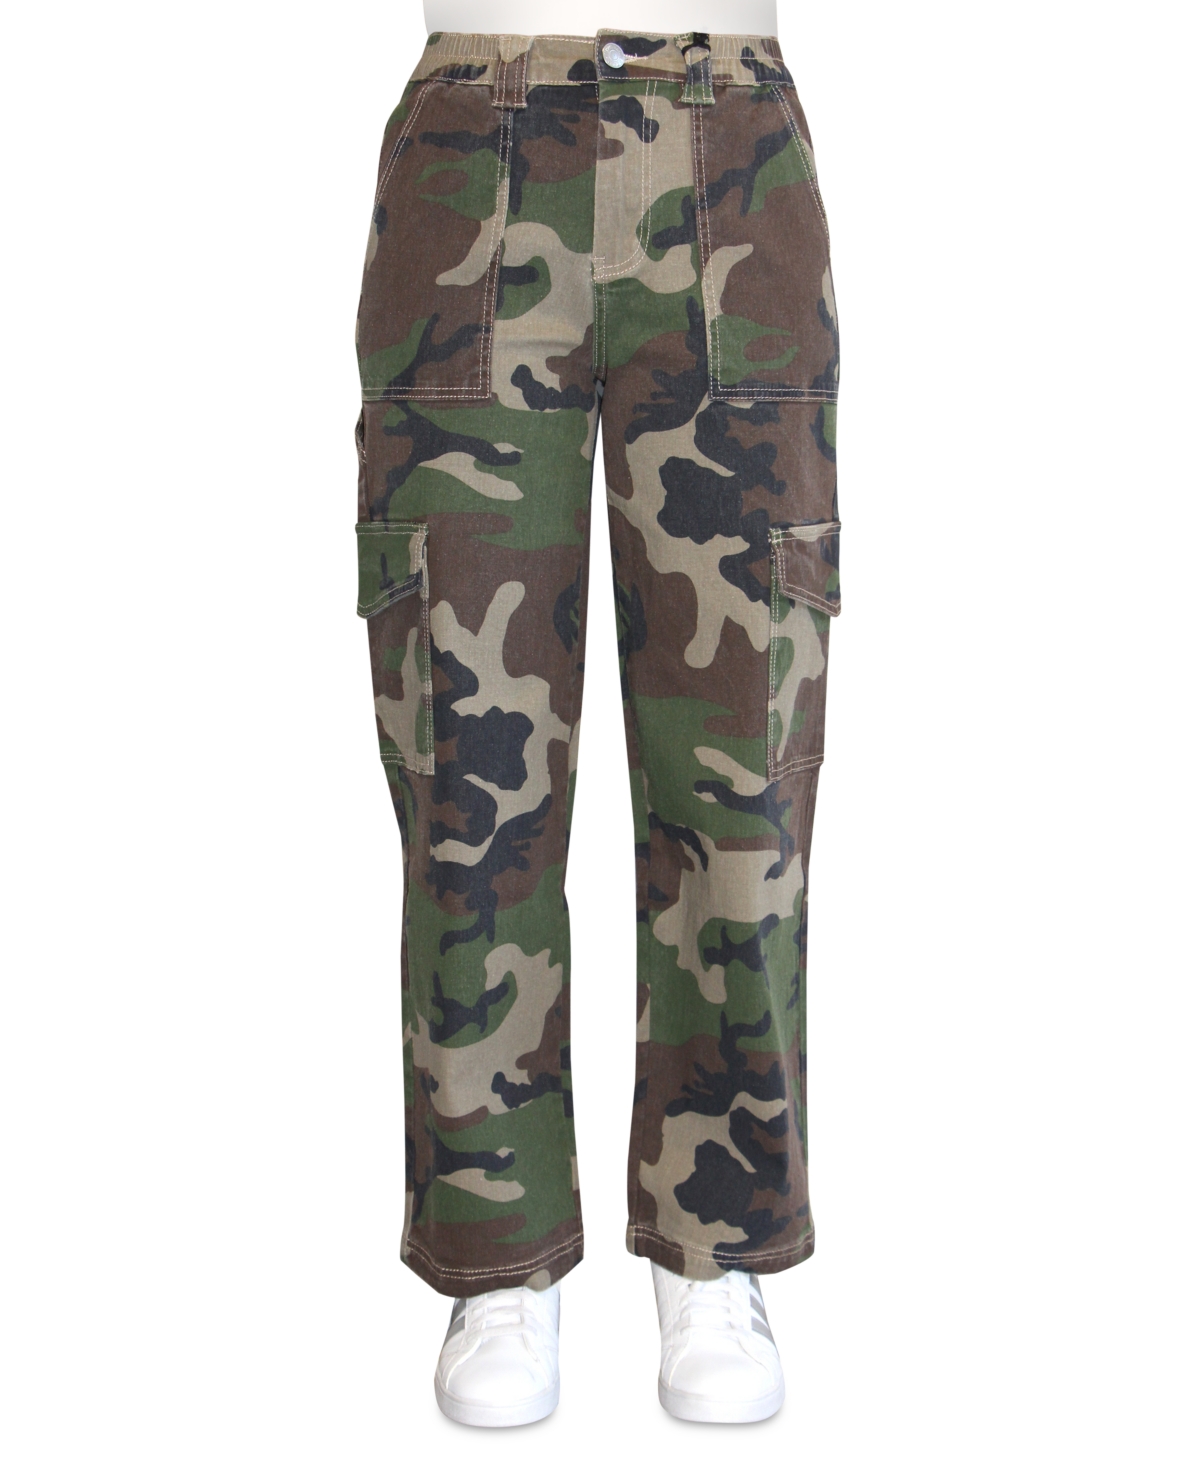 Crave Fame Juniors' High-Rise Utility Cargo Skater Pants - Taupe Camo